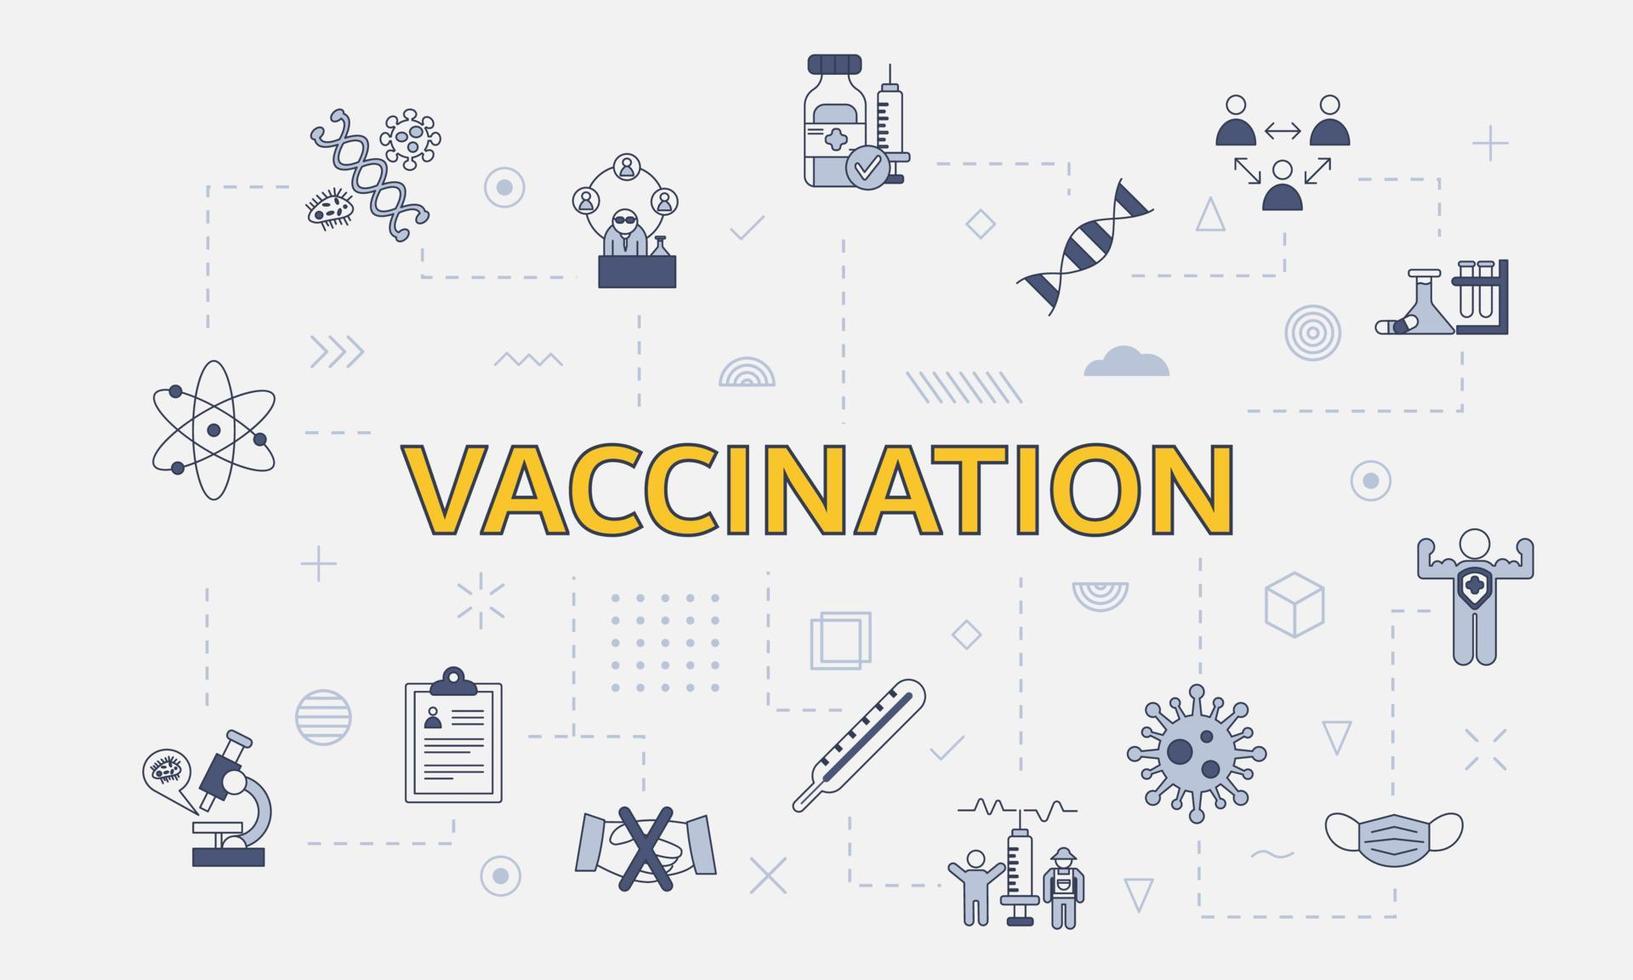 vaccination concept with icon set with big word or text on center vector